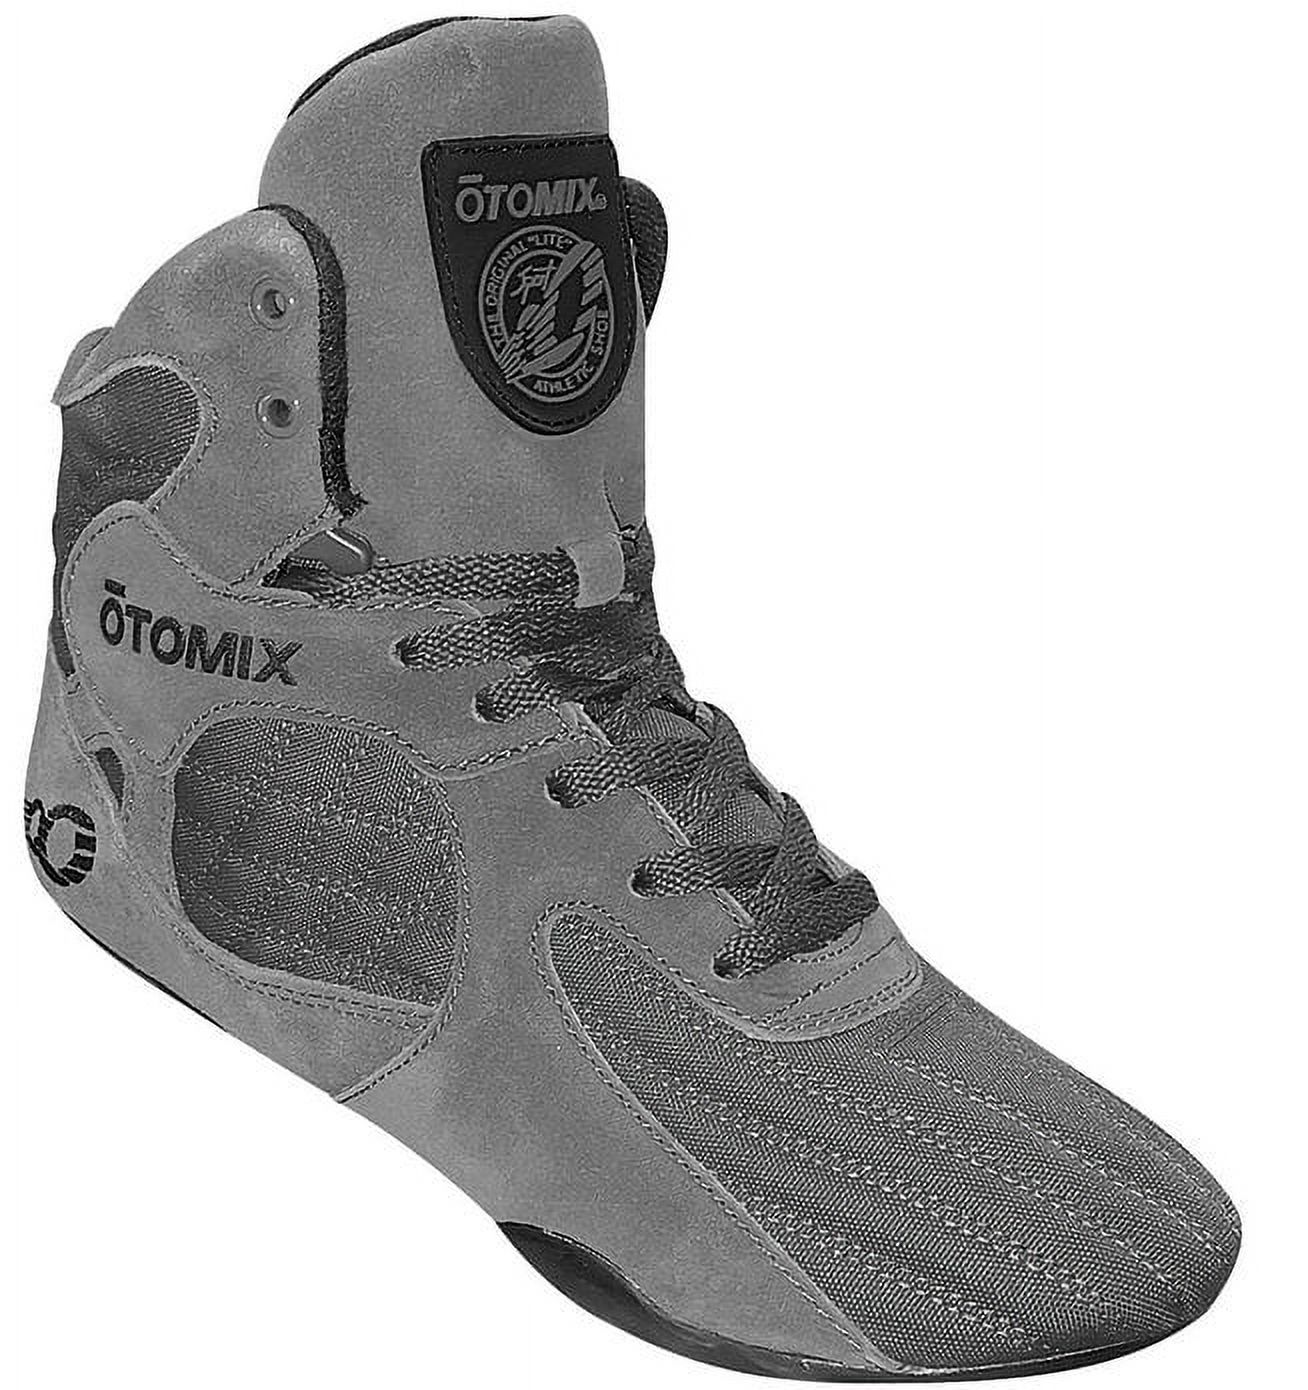 Otomix Grey Stingray Escape Weightlifting & Grappling Shoe (Size 7) - image 1 of 1